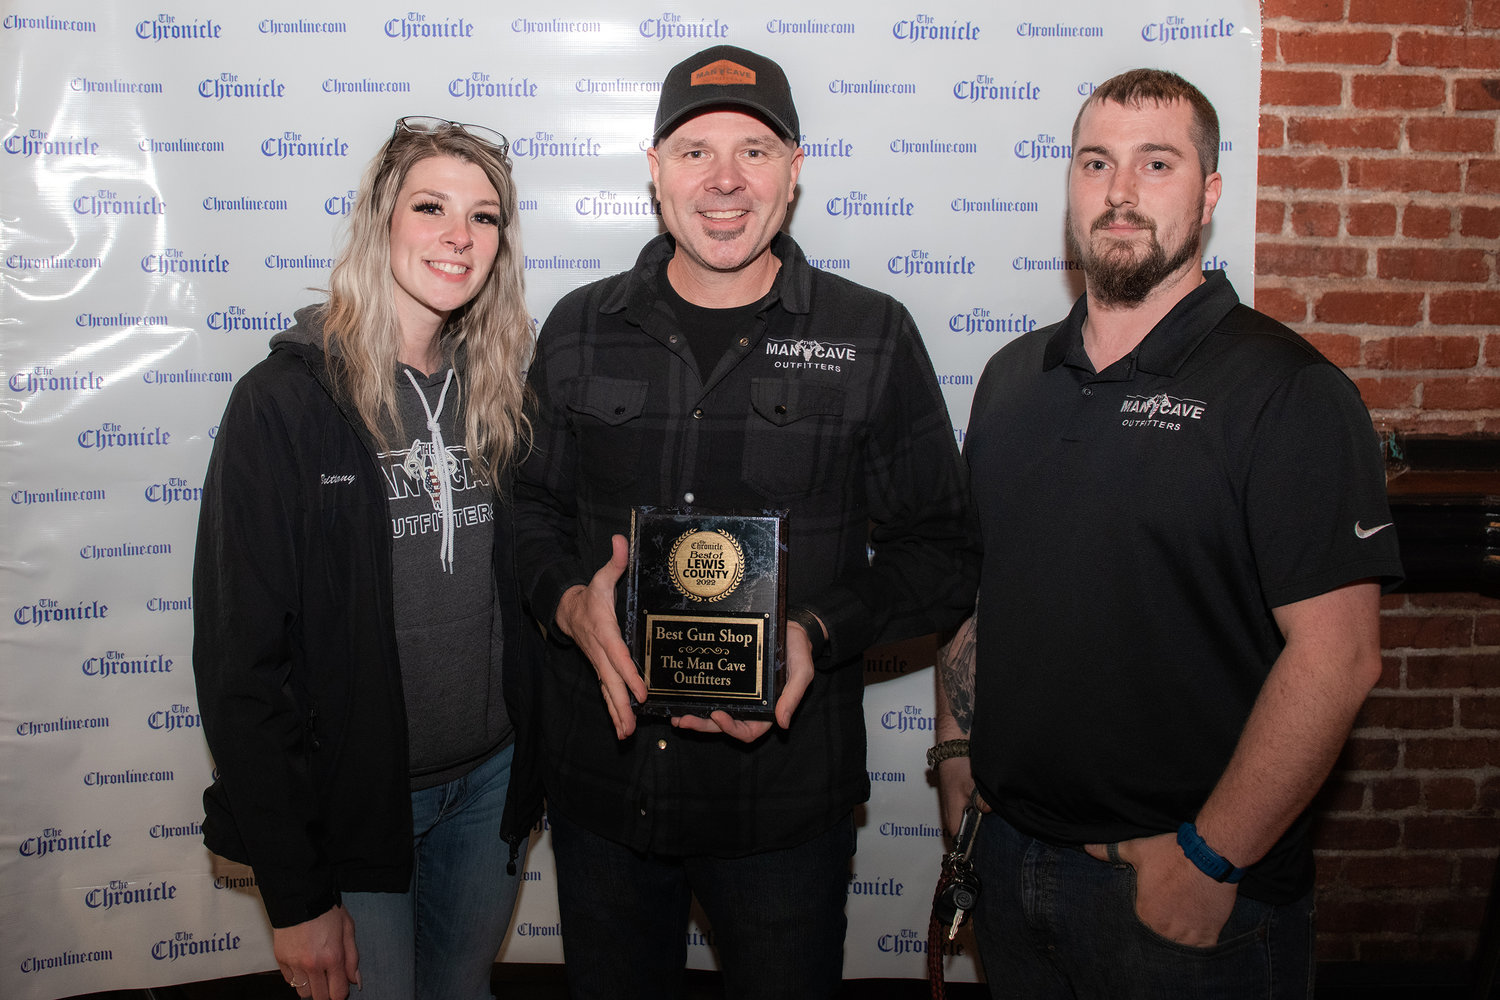 The Man Cave won “Best Gun Shop” during the 2022 Best of Lewis County event hosted by The Chronicle at The Juice Box Thursday evening in Centralia.